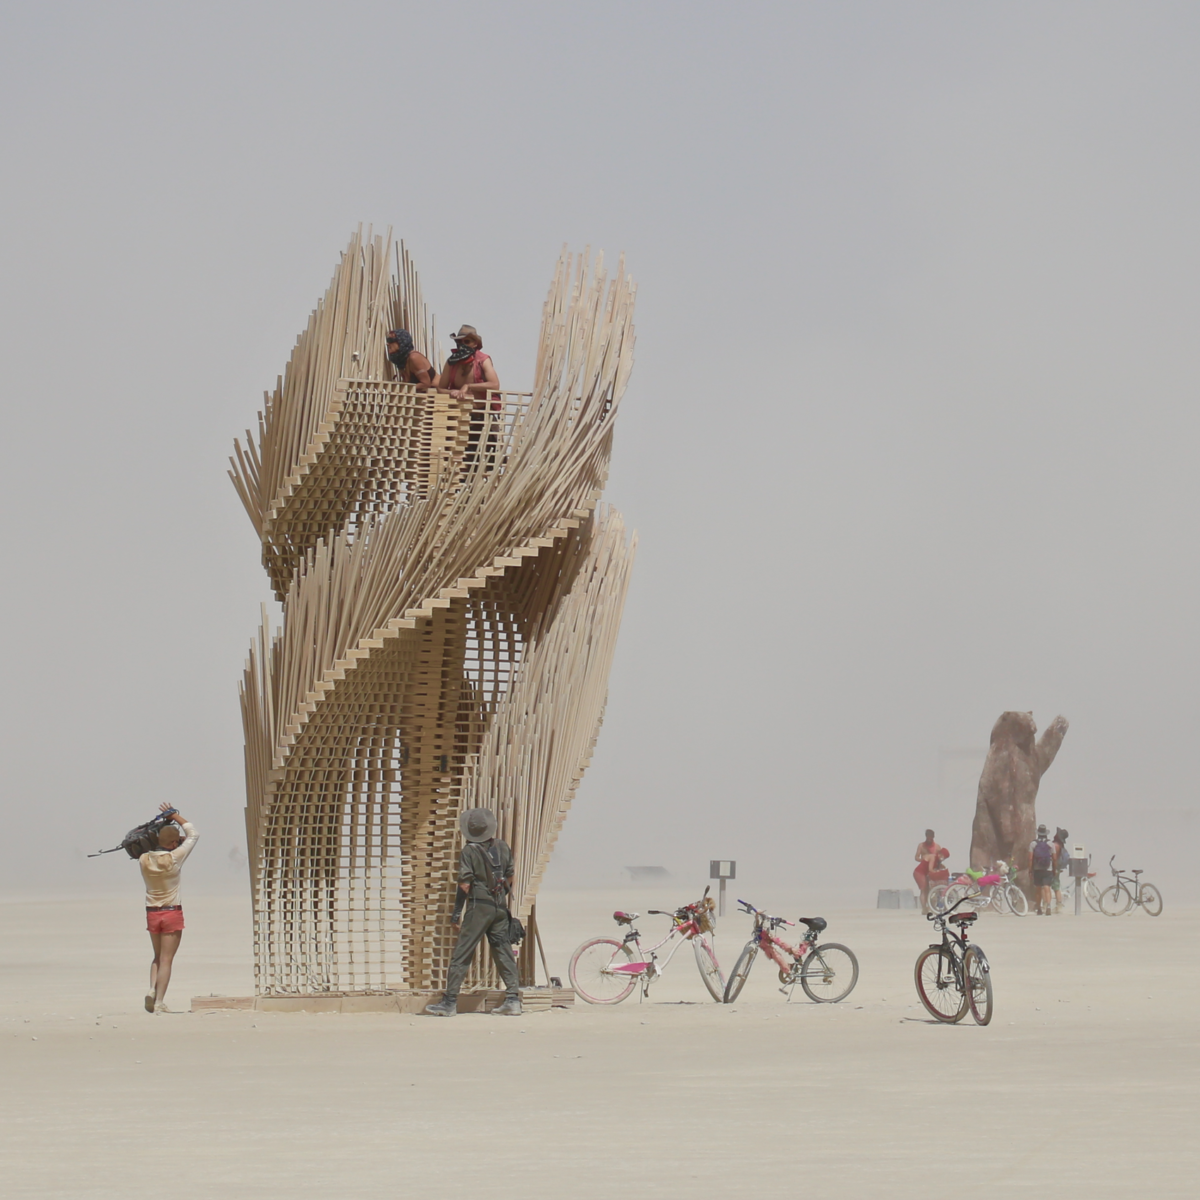 Tangential Dreams at Burning Man 2016 - Day View witth Climber and Bear - Source: https://lostcoastoutpost.com ©Mamou-Mani